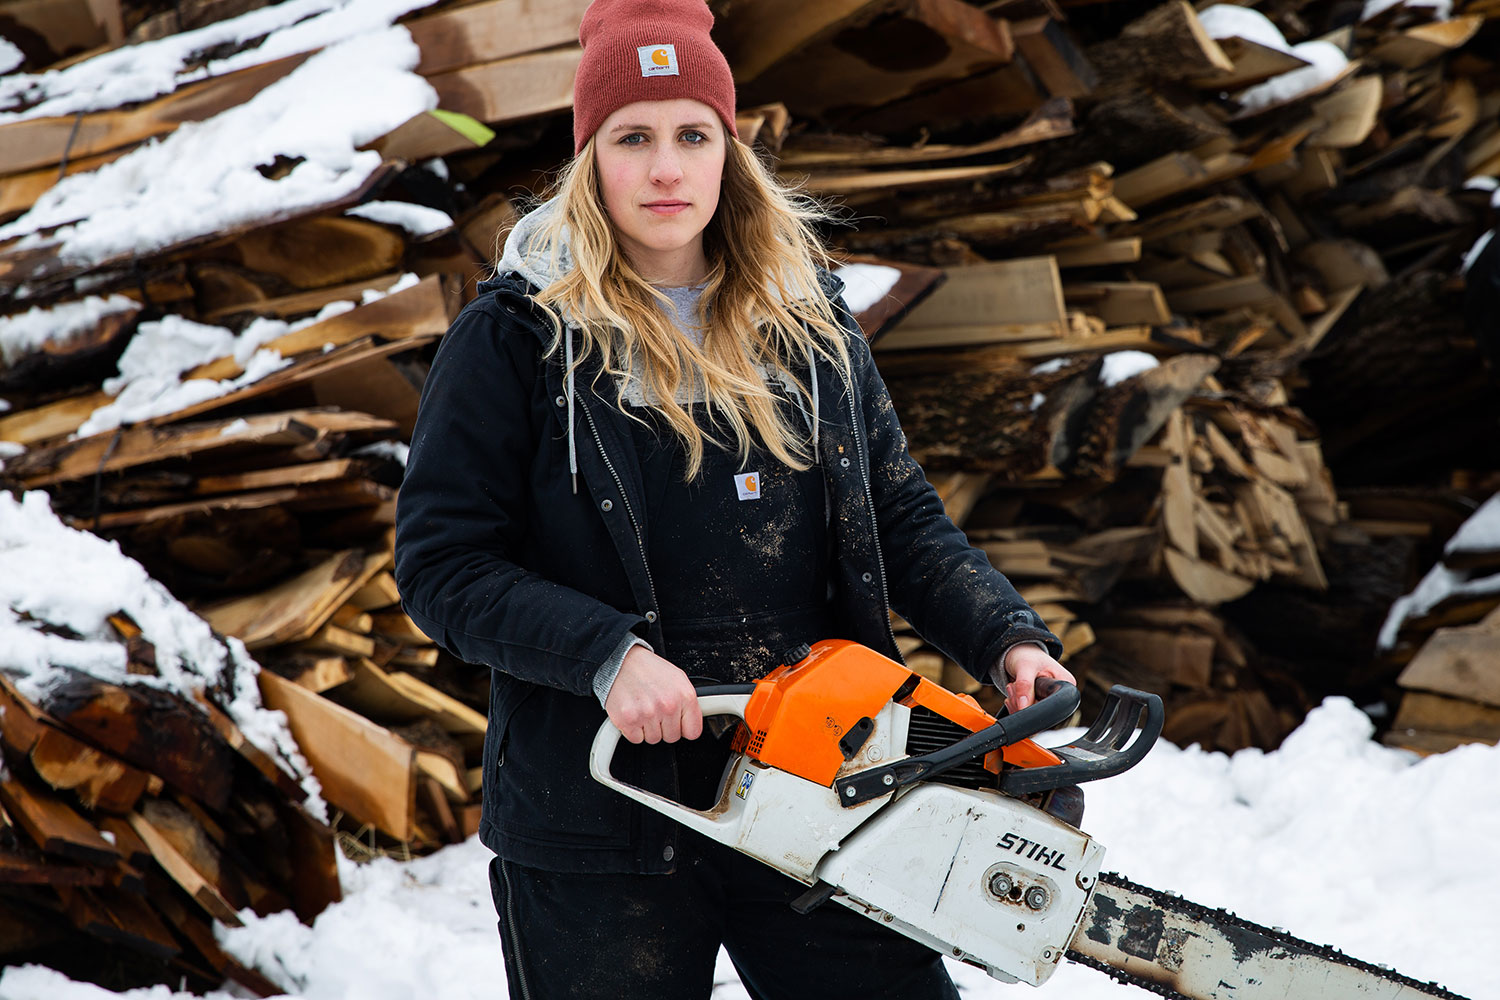 Brit McCoy of The Wood Cycle in Wisconsin / Crafted in Carhartt